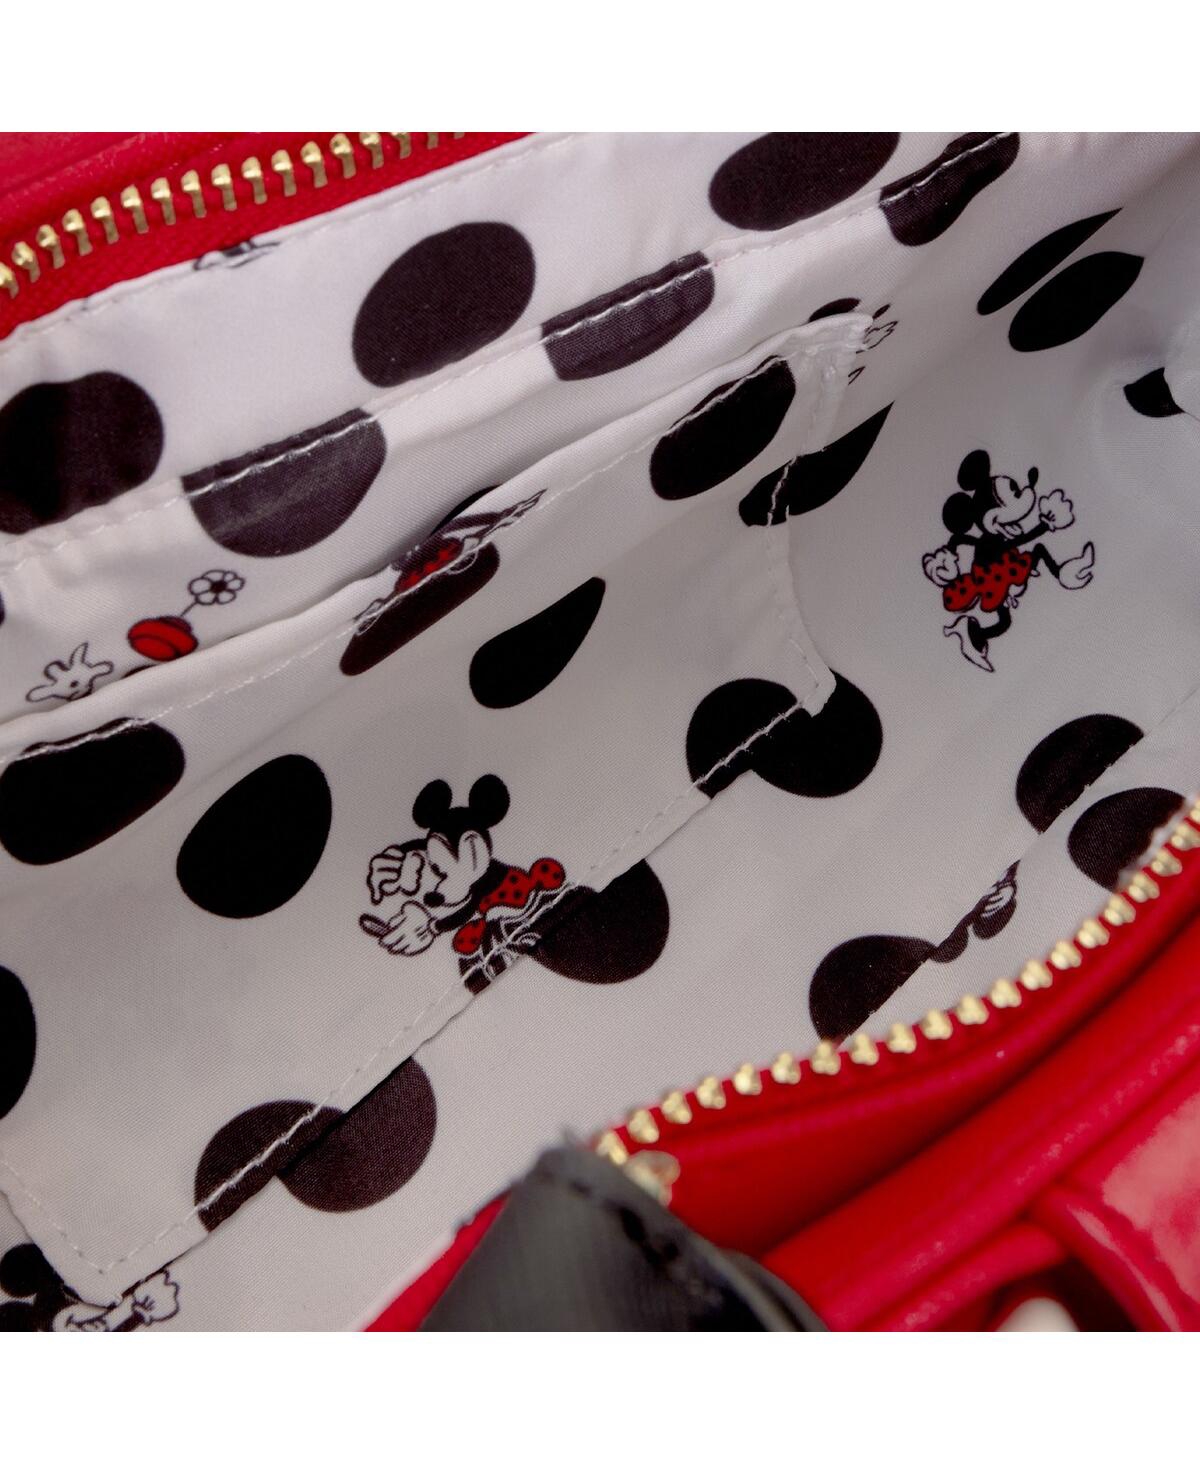 Shop Loungefly Women's  Mickey & Friends Distressed Minnie Mouse Rocks The Dots Figural Bow Crossbody Bag In Scarlet